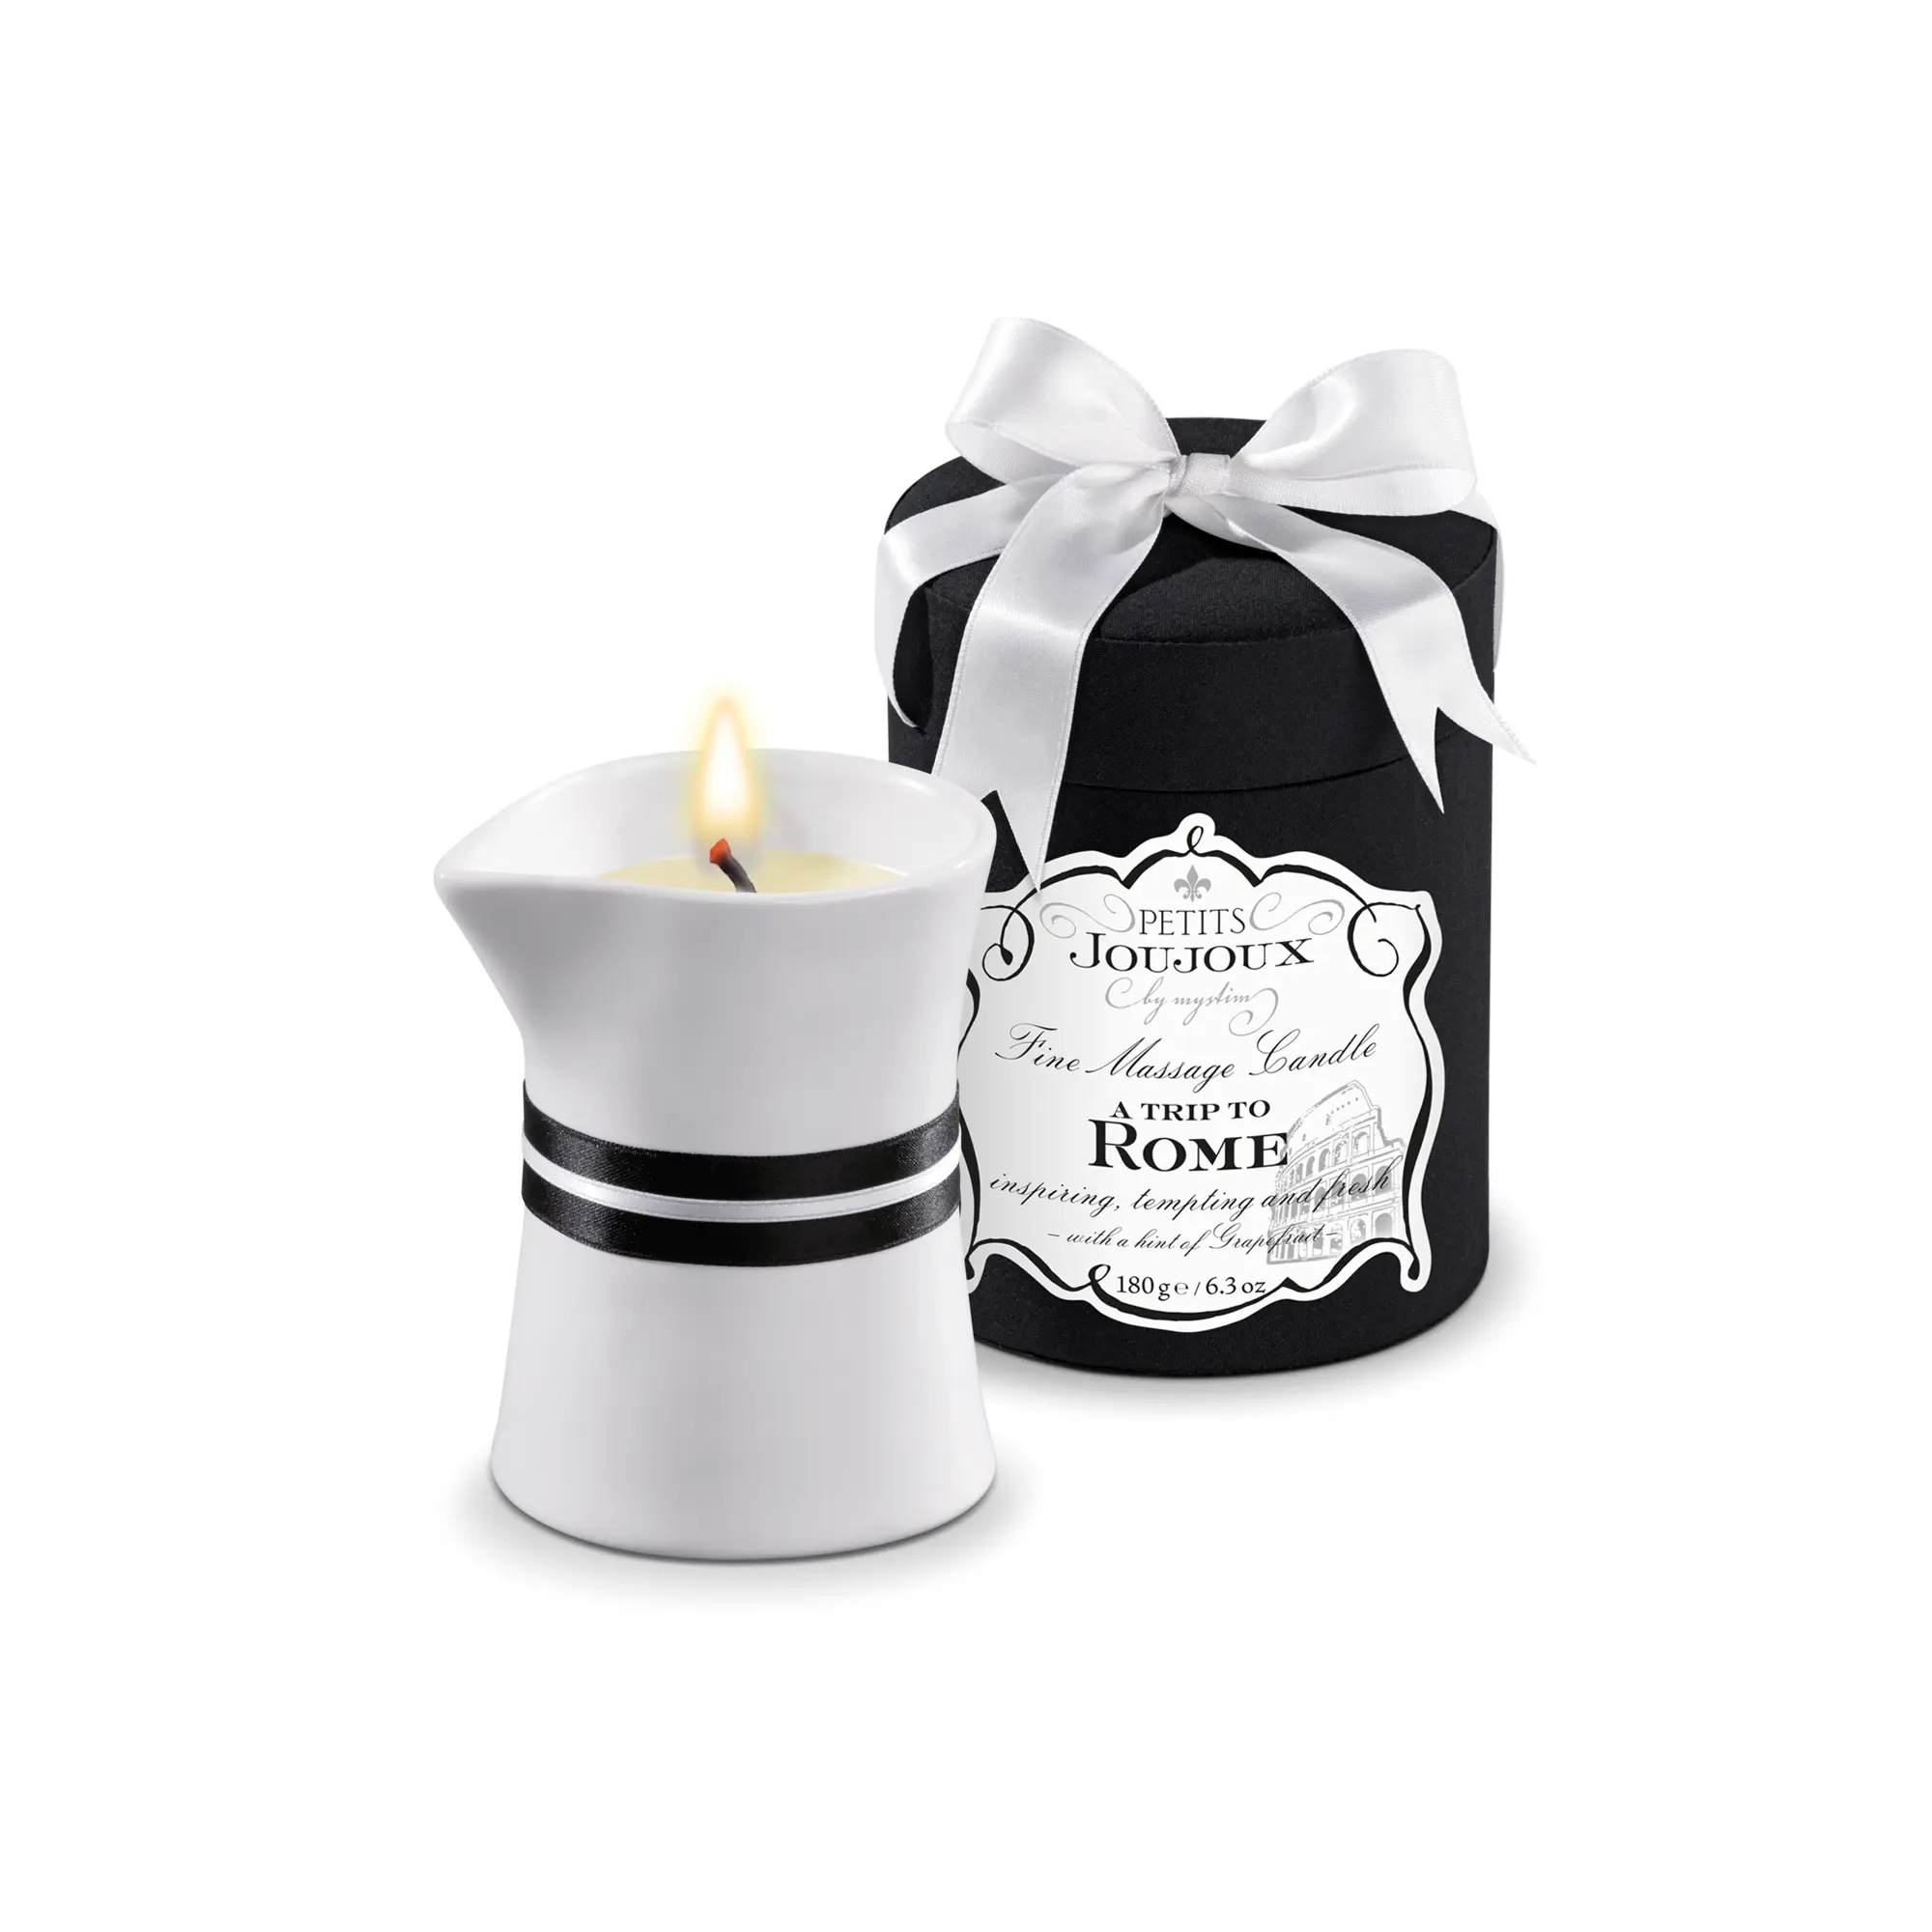 A trip to Rome - Candle 6.7 oz